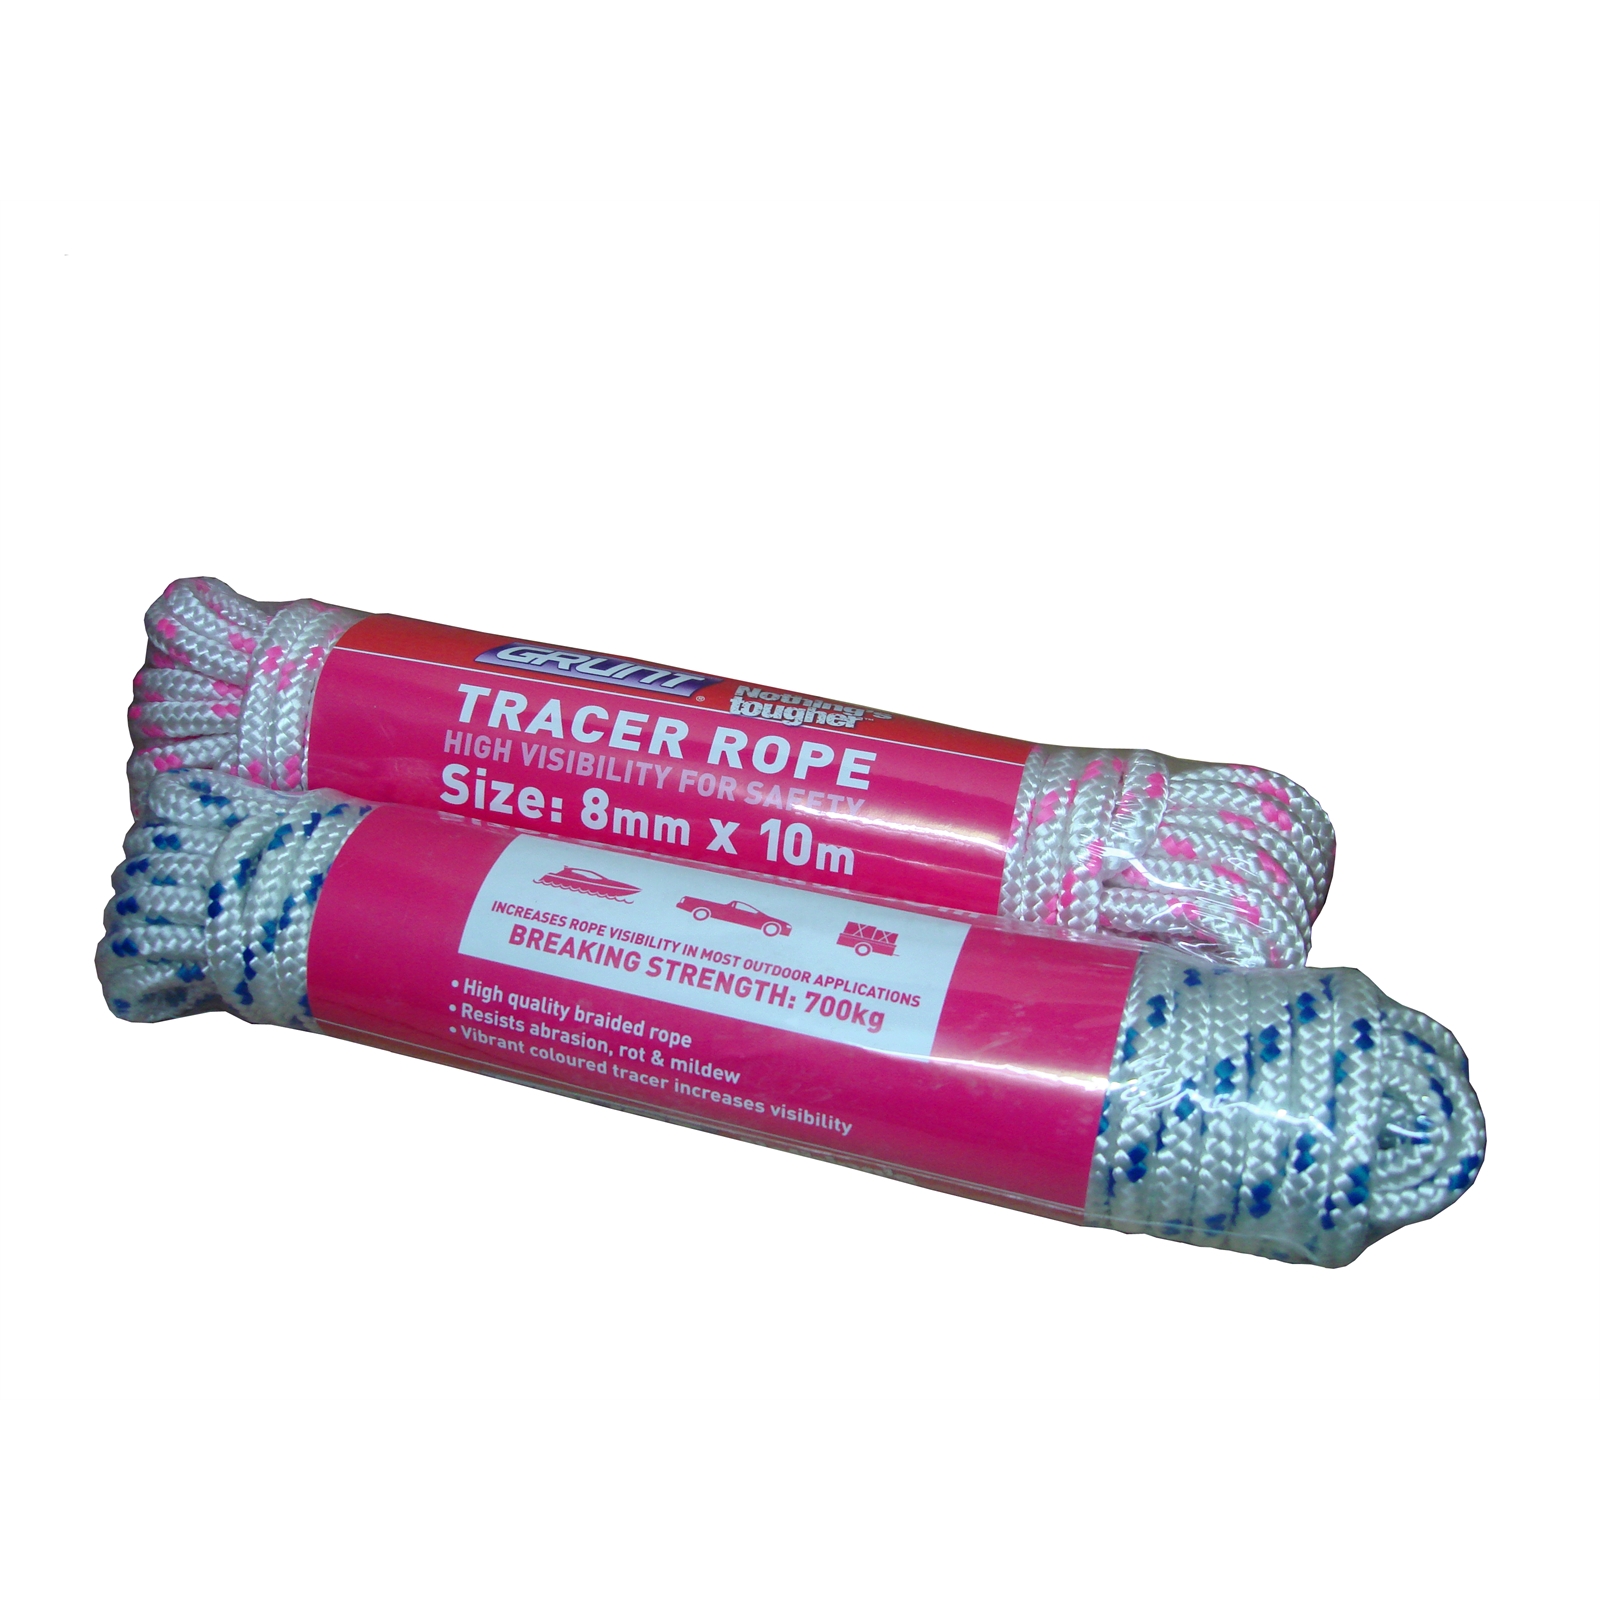 Grunt 8mm x 10m Tracer Rope